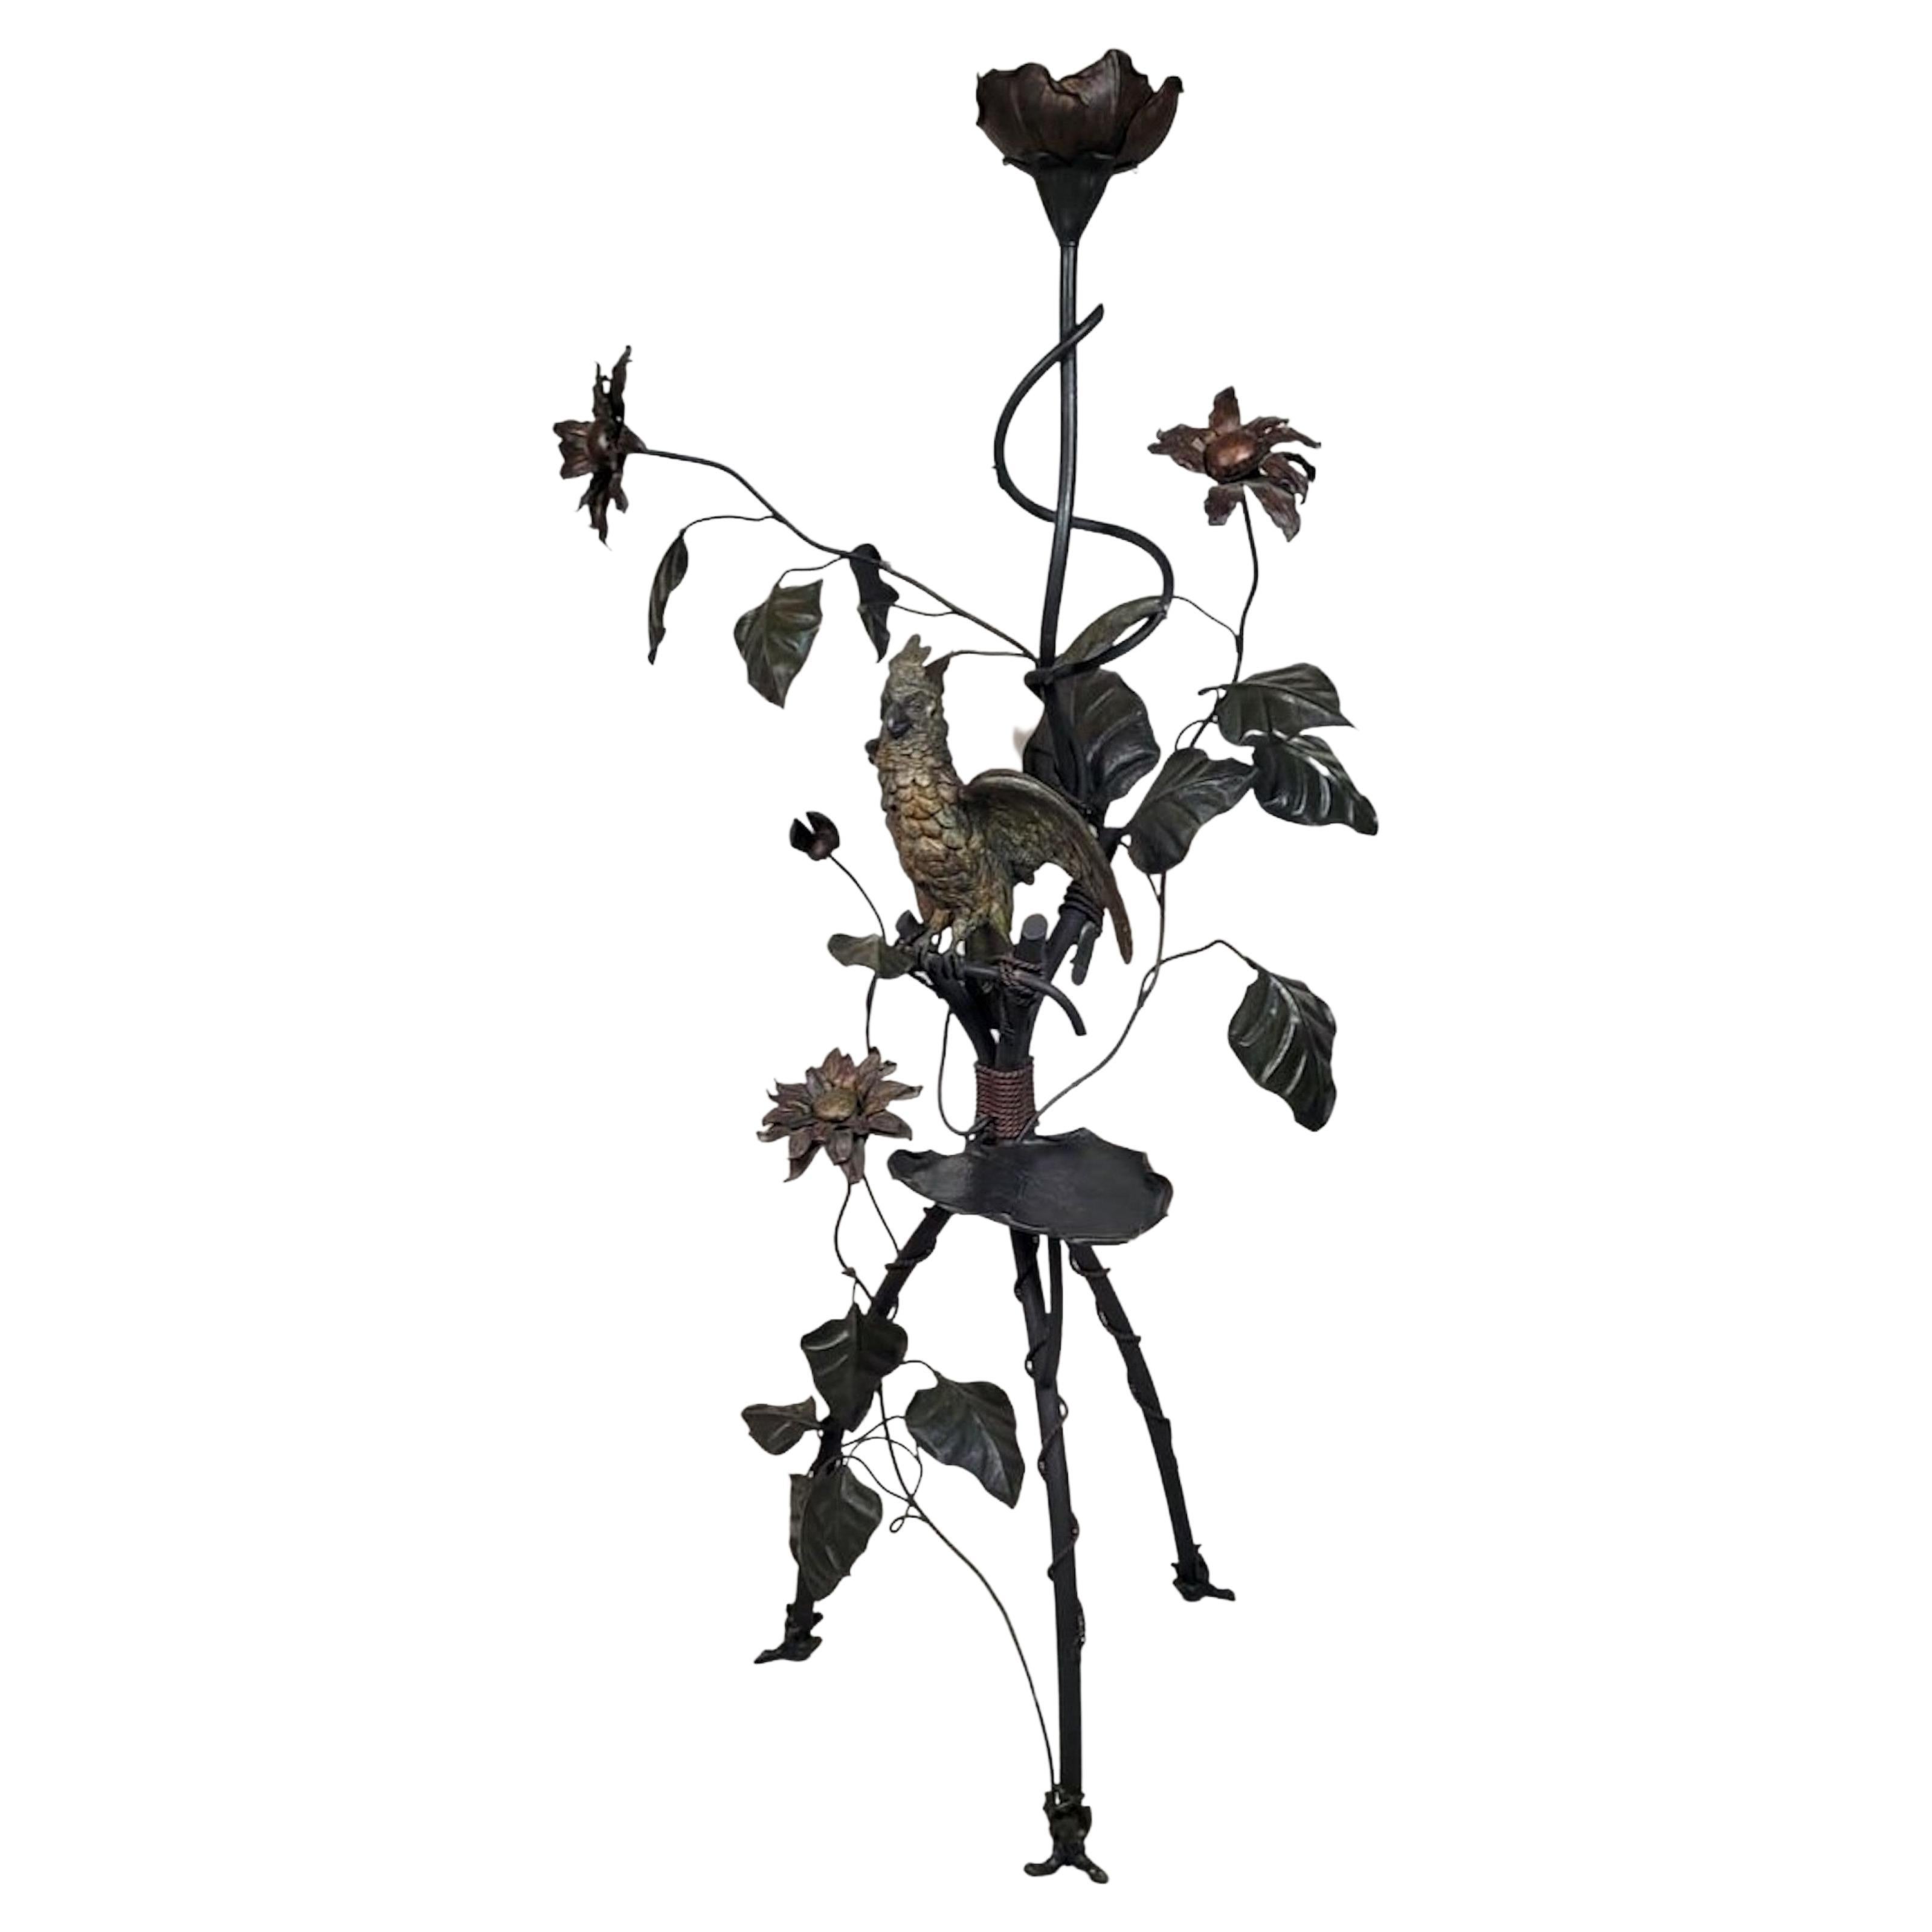 Wrought Iron Floor Lamp - Decorations With Leaves, Flowers, And Parrot